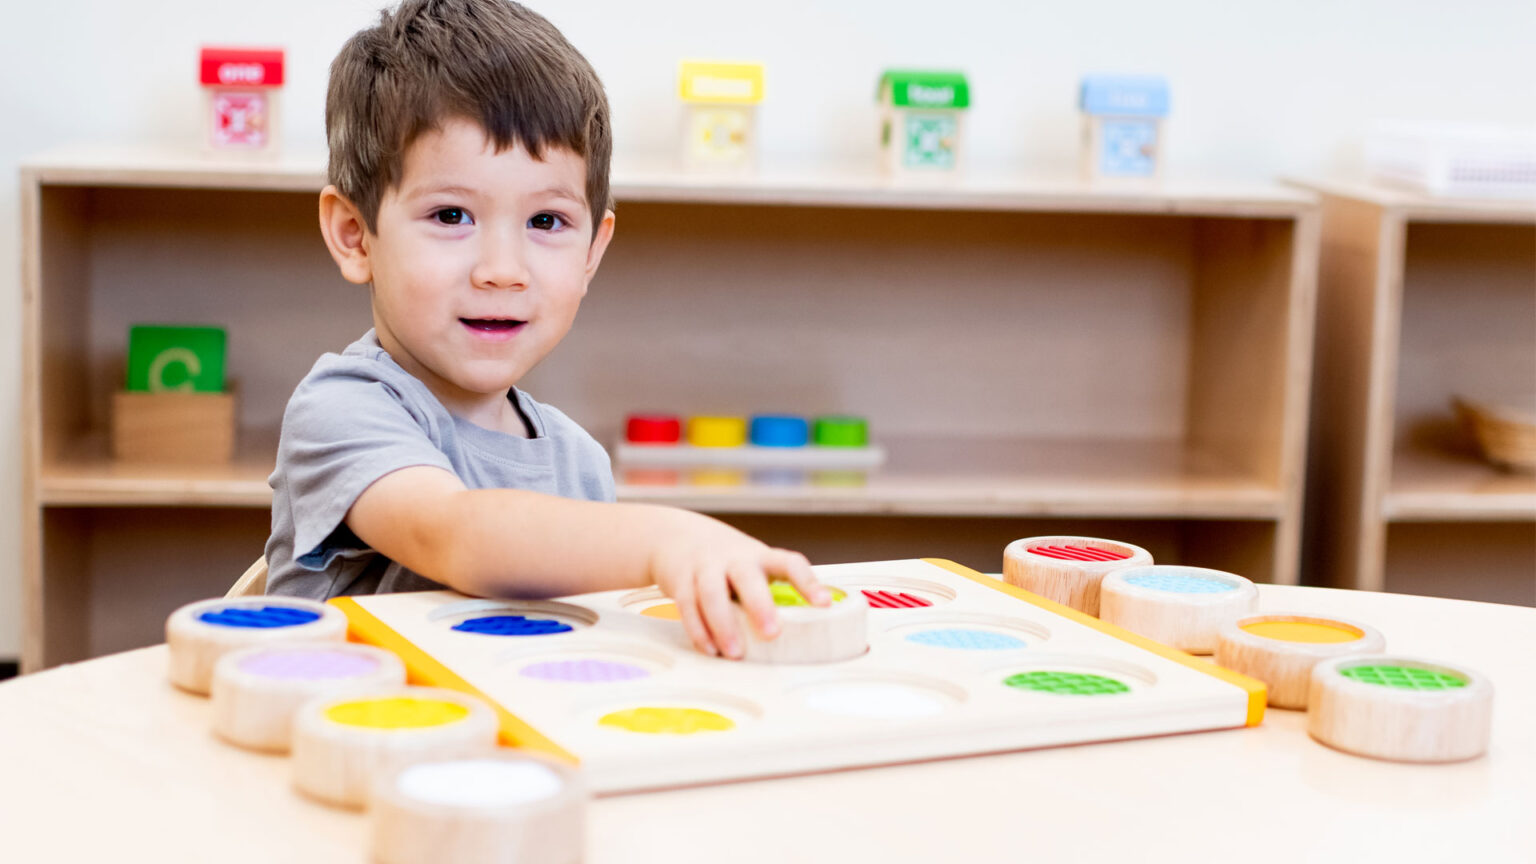 A boy playing matching colors using round, wooden toys with color patches